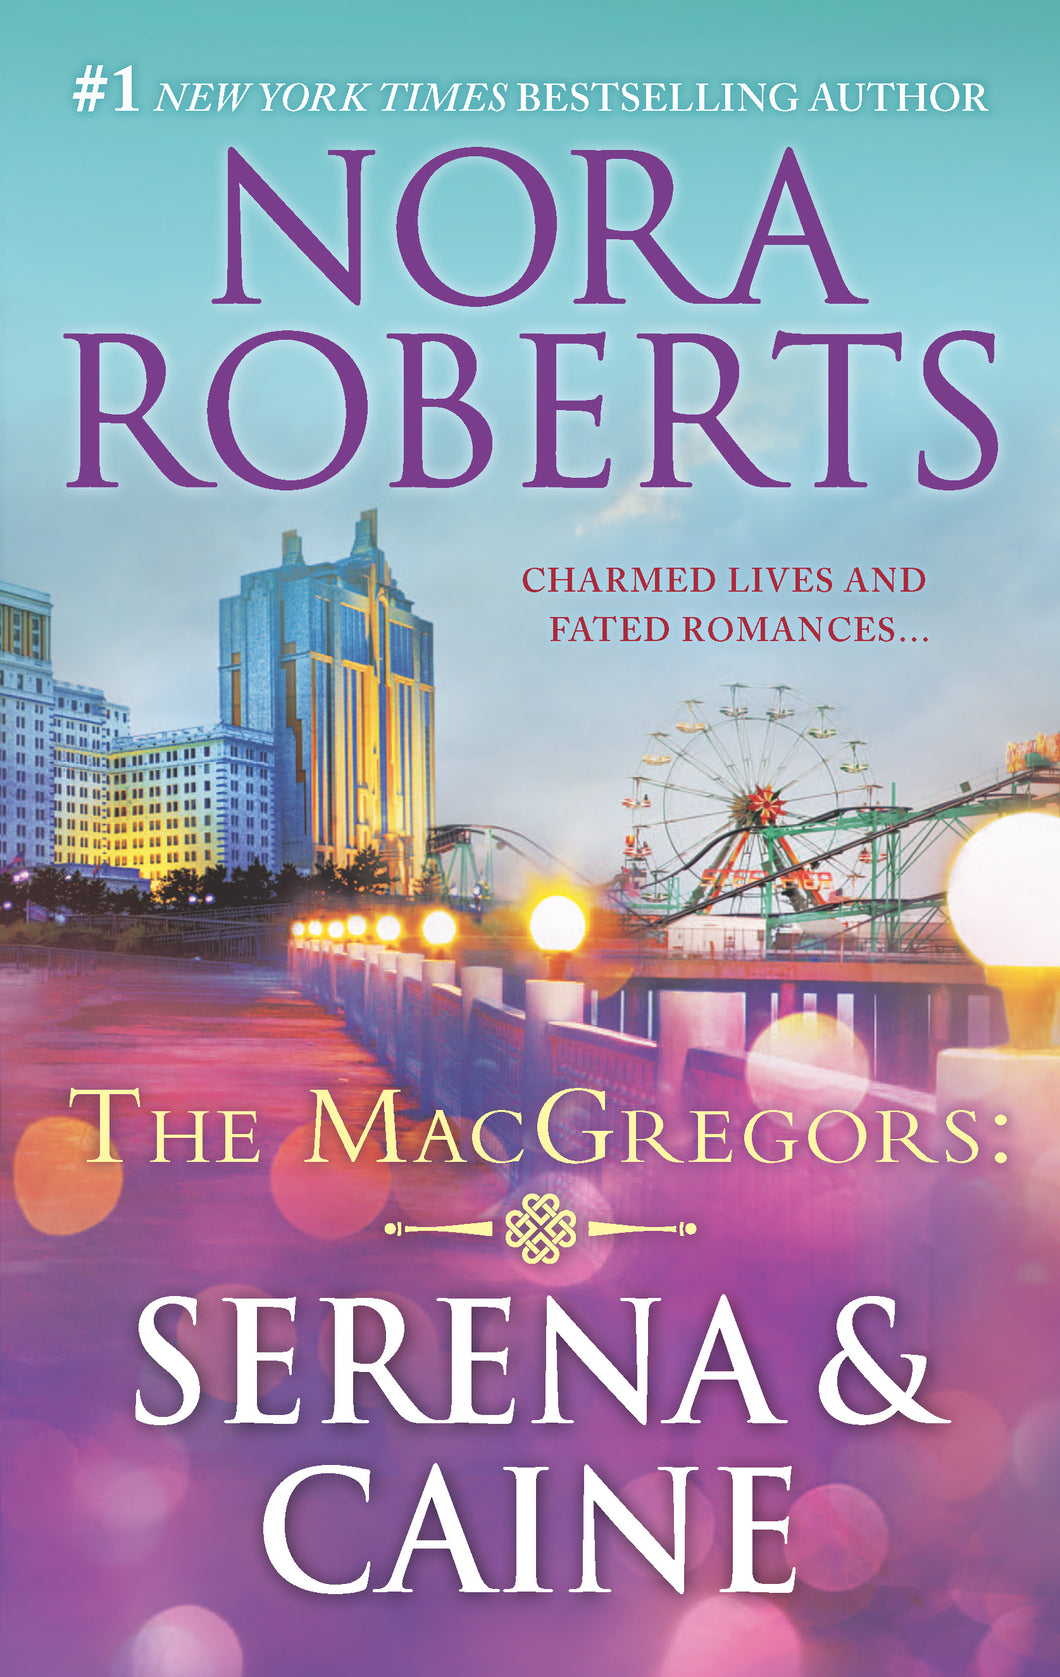 The MacGregors: Serena & Caine